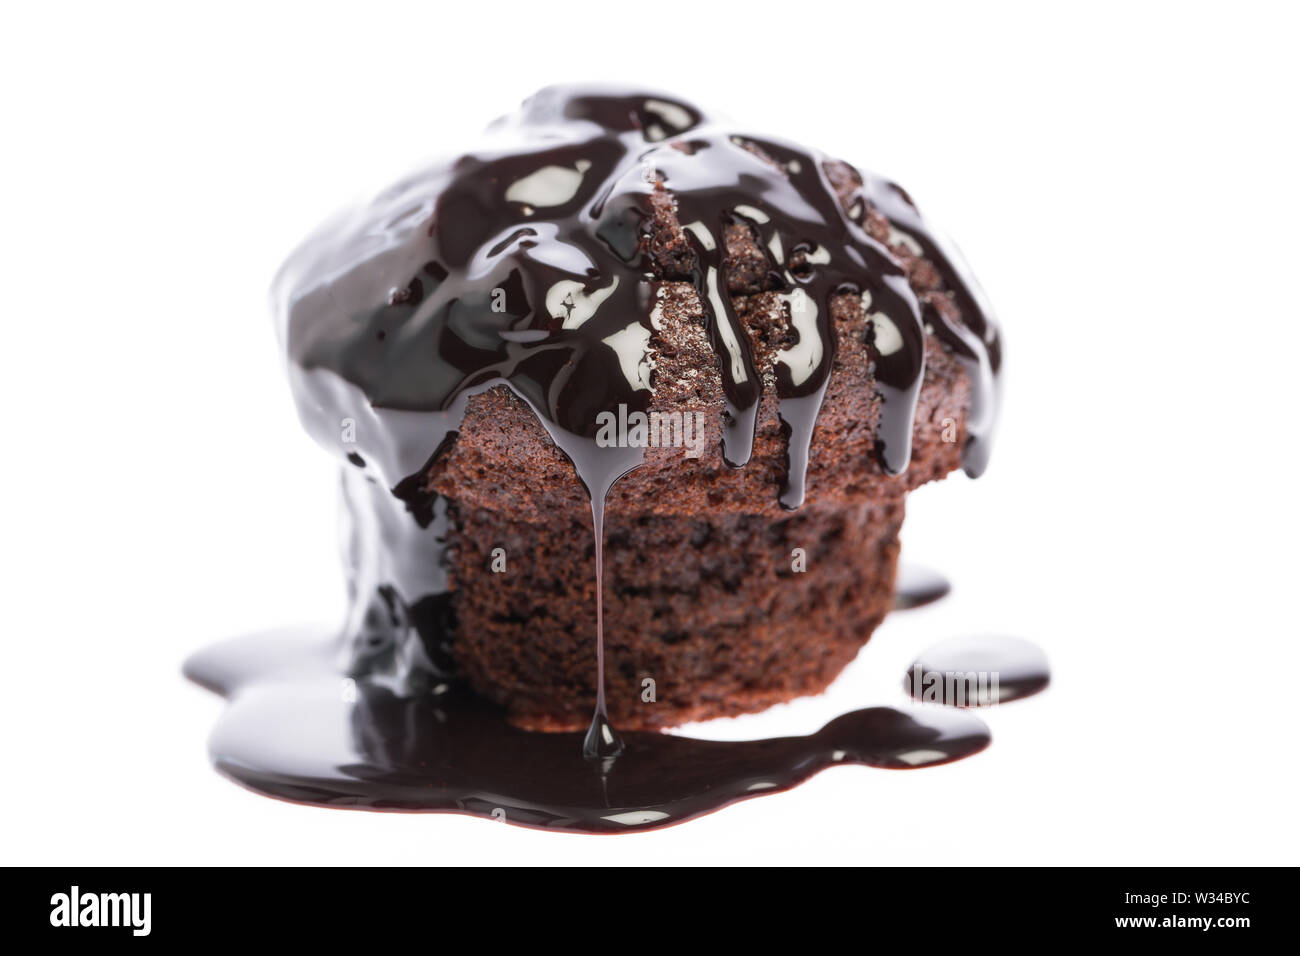 Mohr im hemd - Steamed chocolate cake topped with chocolate sauce Stock Photo